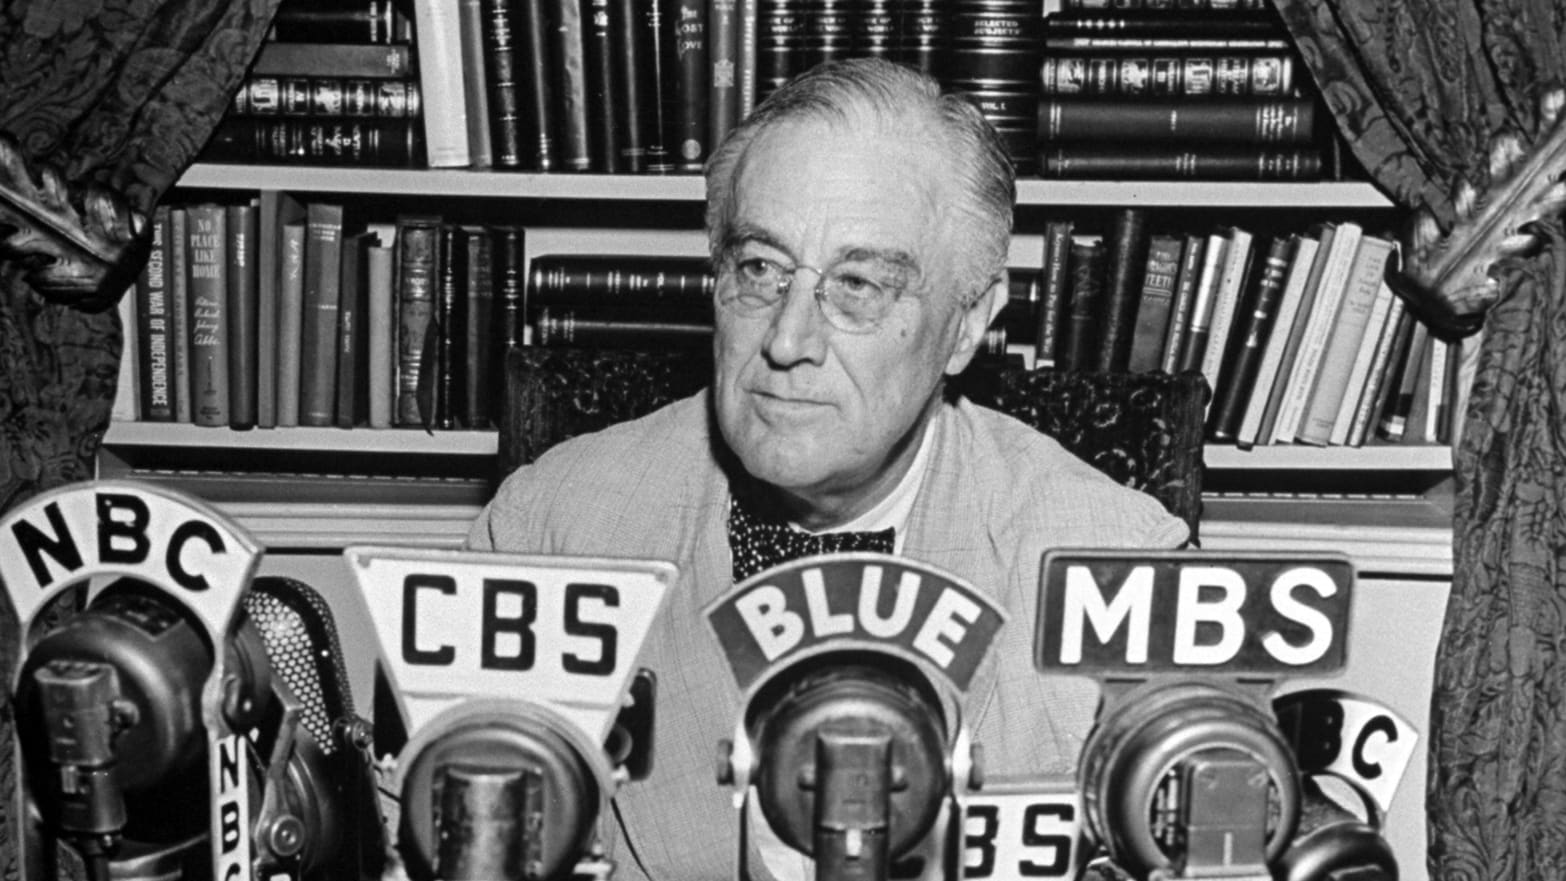 FDR's D-Day Prayer was a powerful radio address inspiring courage and hope during World War II. Check out our “FDR D-Day Prayer/Broadcast to Nation" speech summary, text, and analysis.